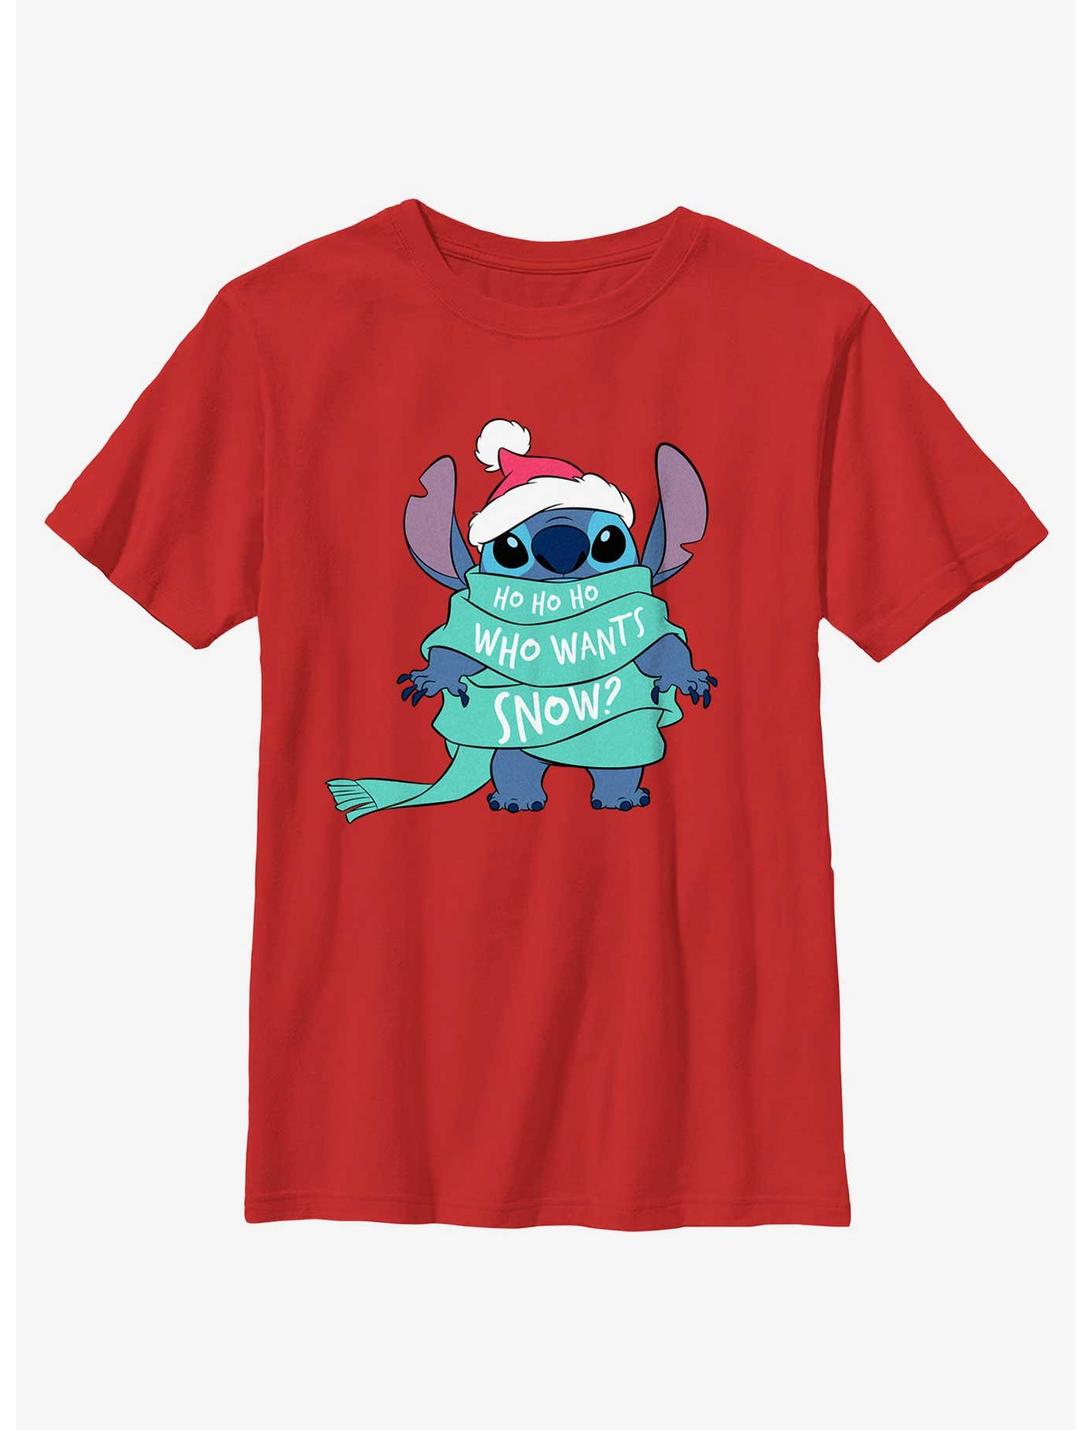 Disney Lilo & Stitch Who Wants Snow Youth T-Shirt, RED, hi-res